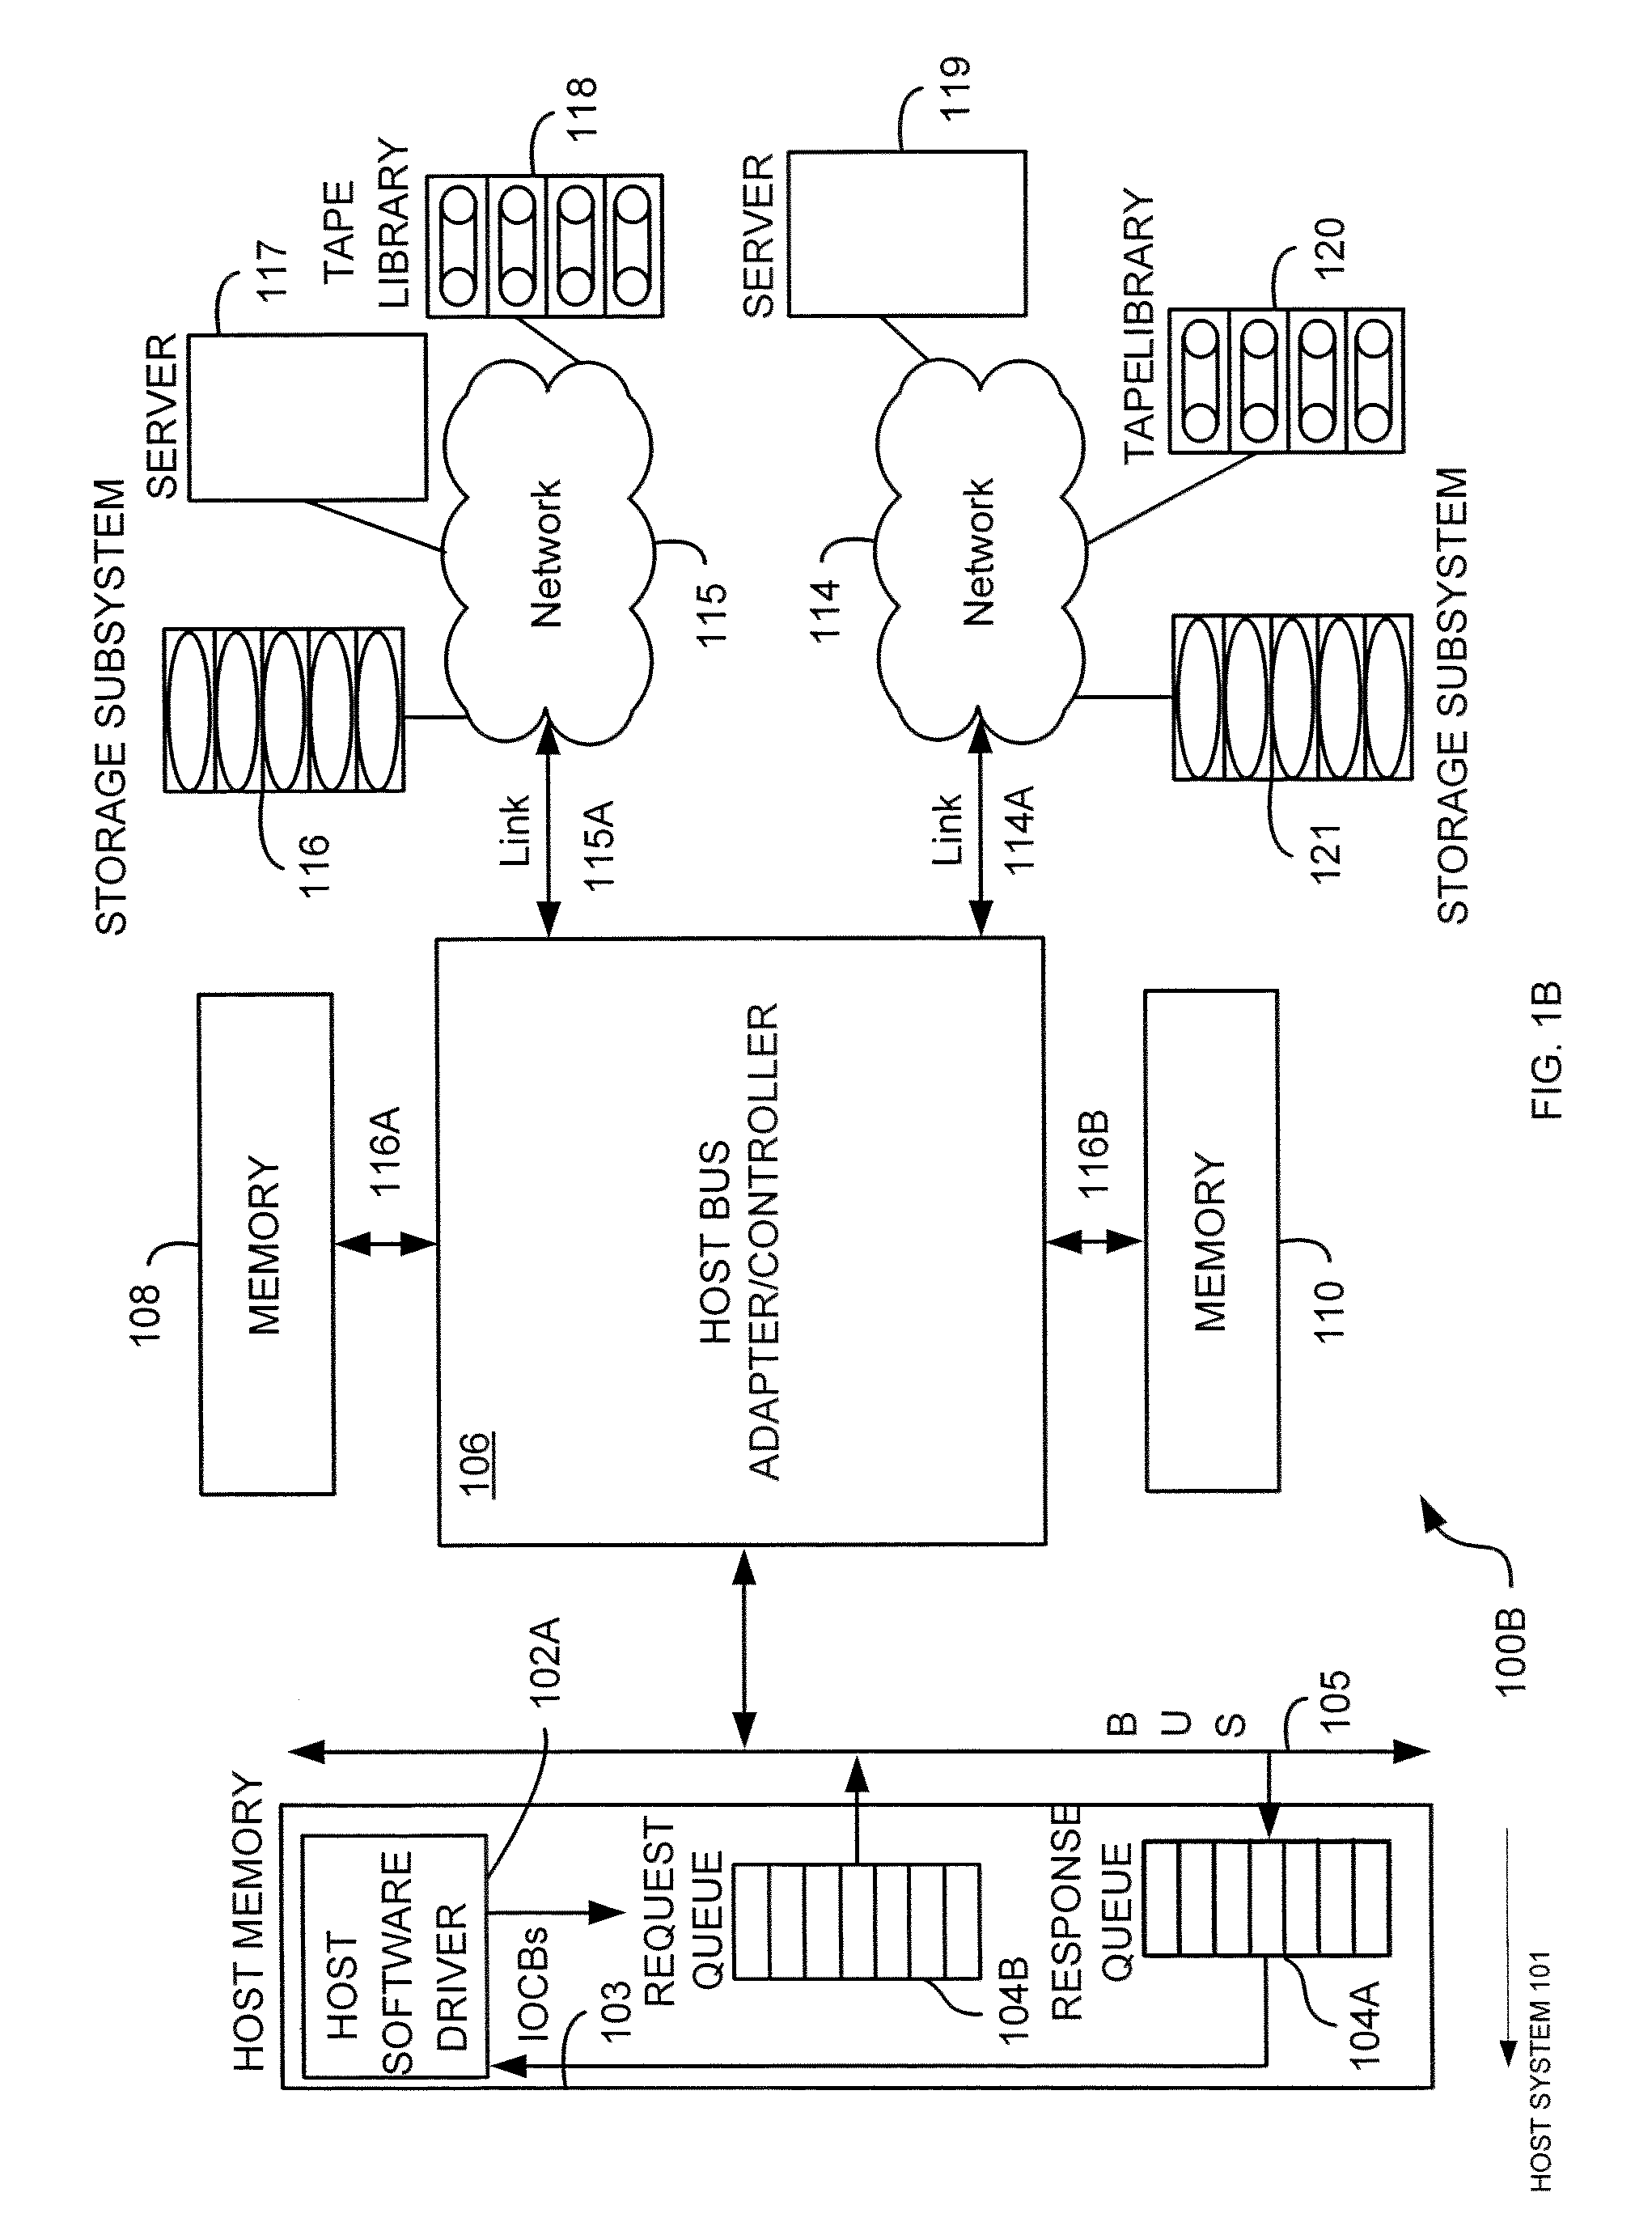 Method and system for quality of service in host bus adapters